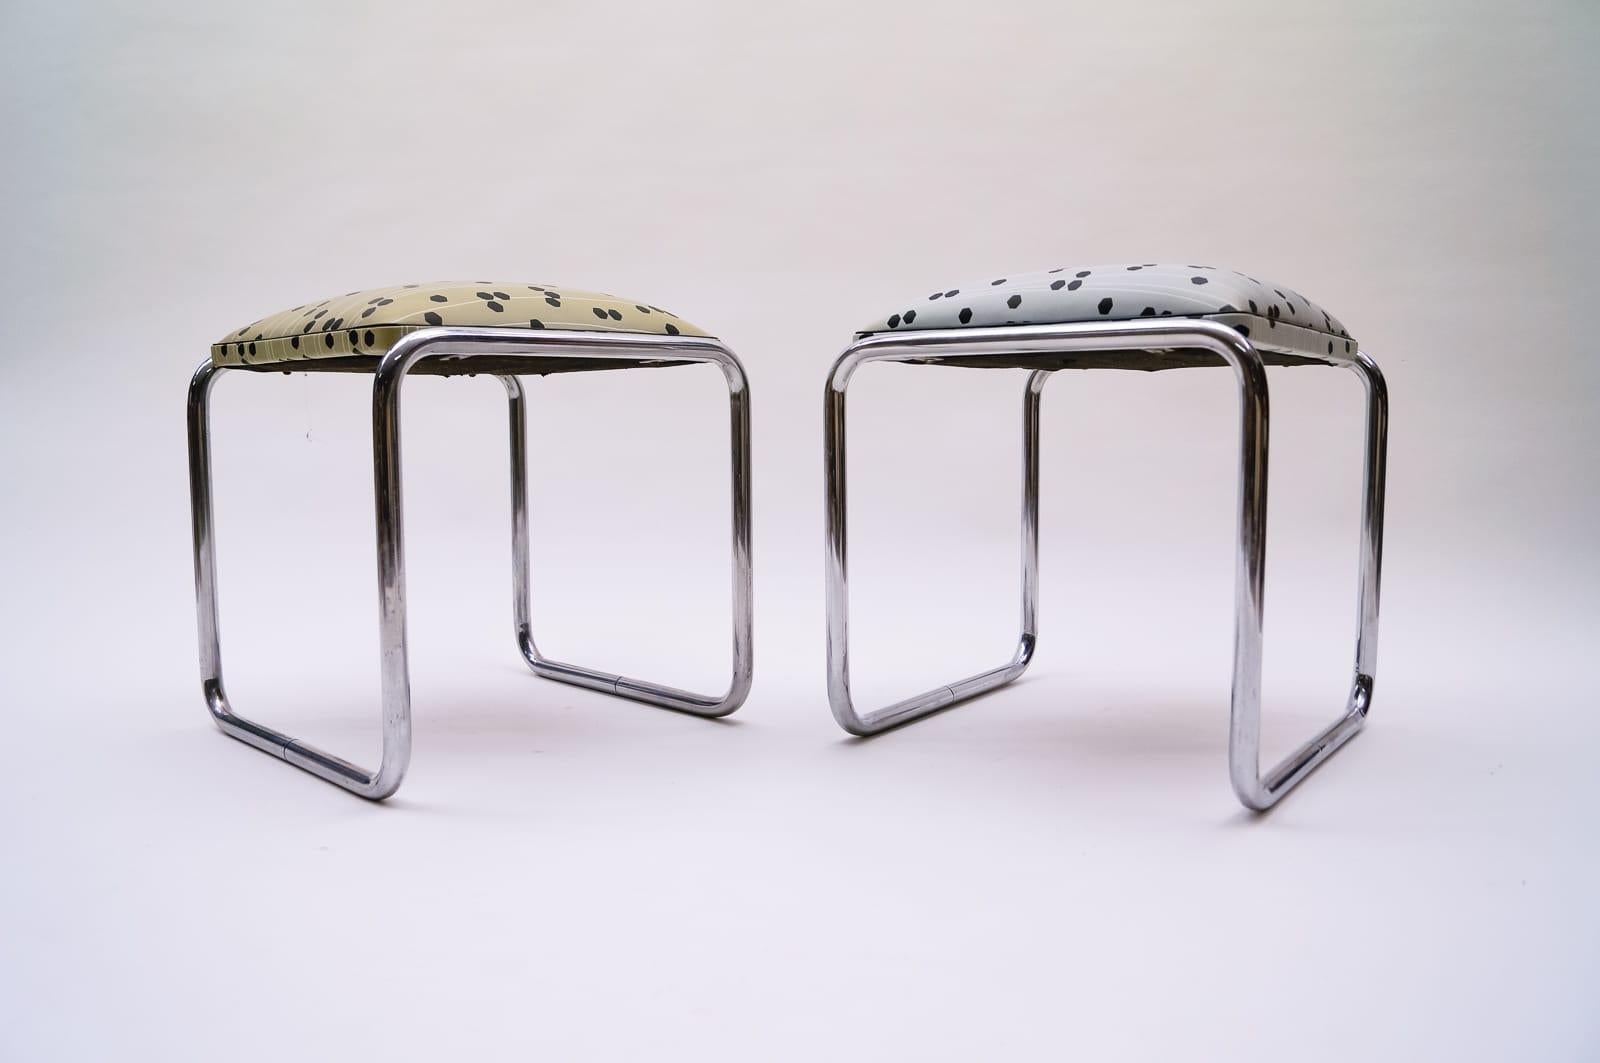 Pair of Tubular Steel Bauhaus Stools with Graphic Patterns, 1940s, Germany 1